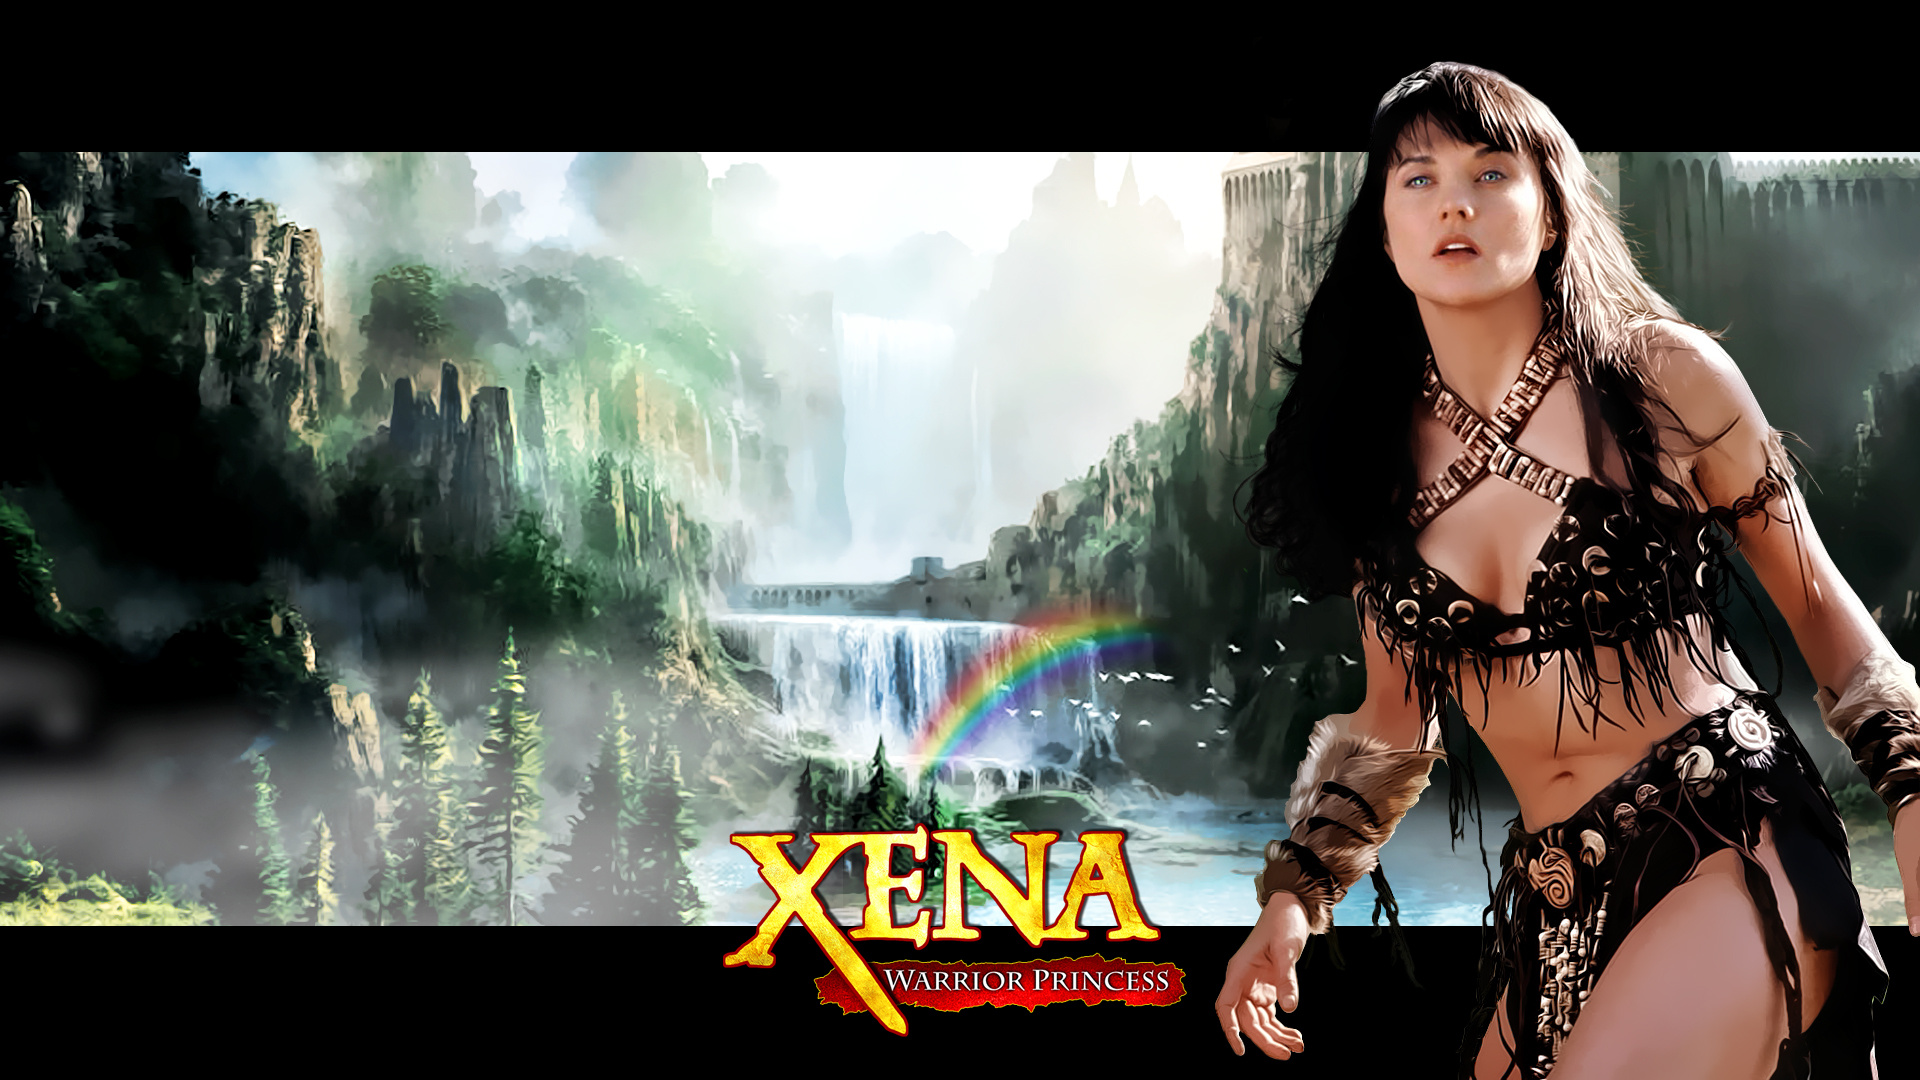 Xena: Warrior Princess (TV Series): An action-adventure television show that gained great renown from fans. 1920x1080 Full HD Background.